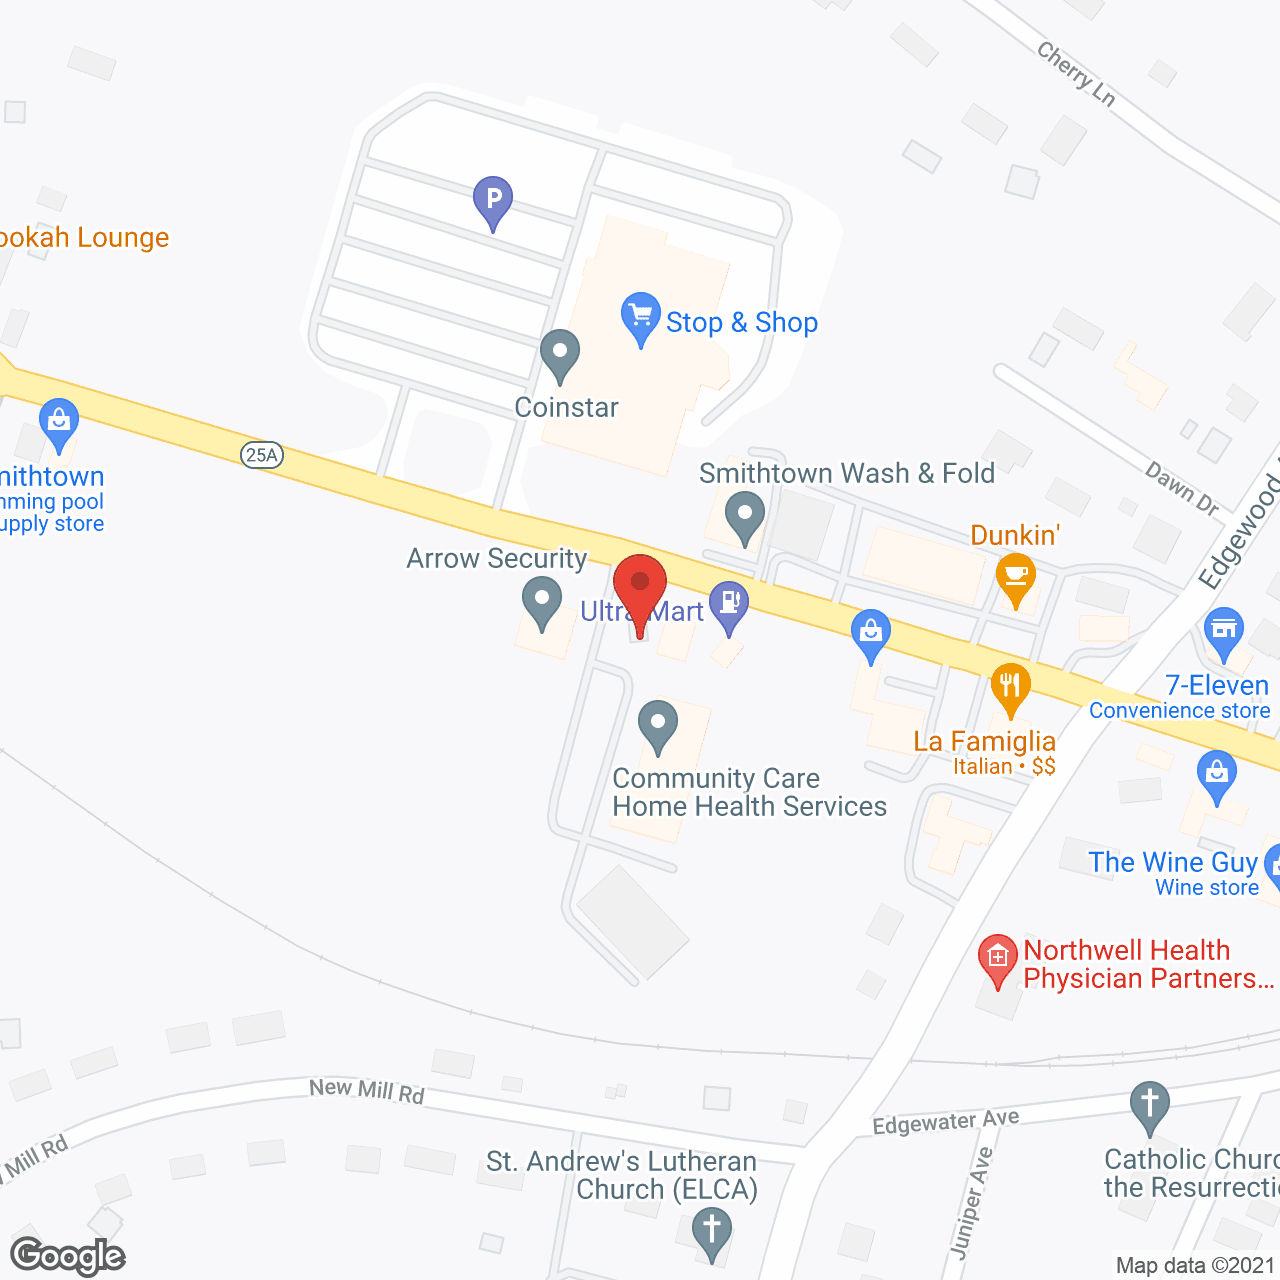 Community Care Home Health Services in google map